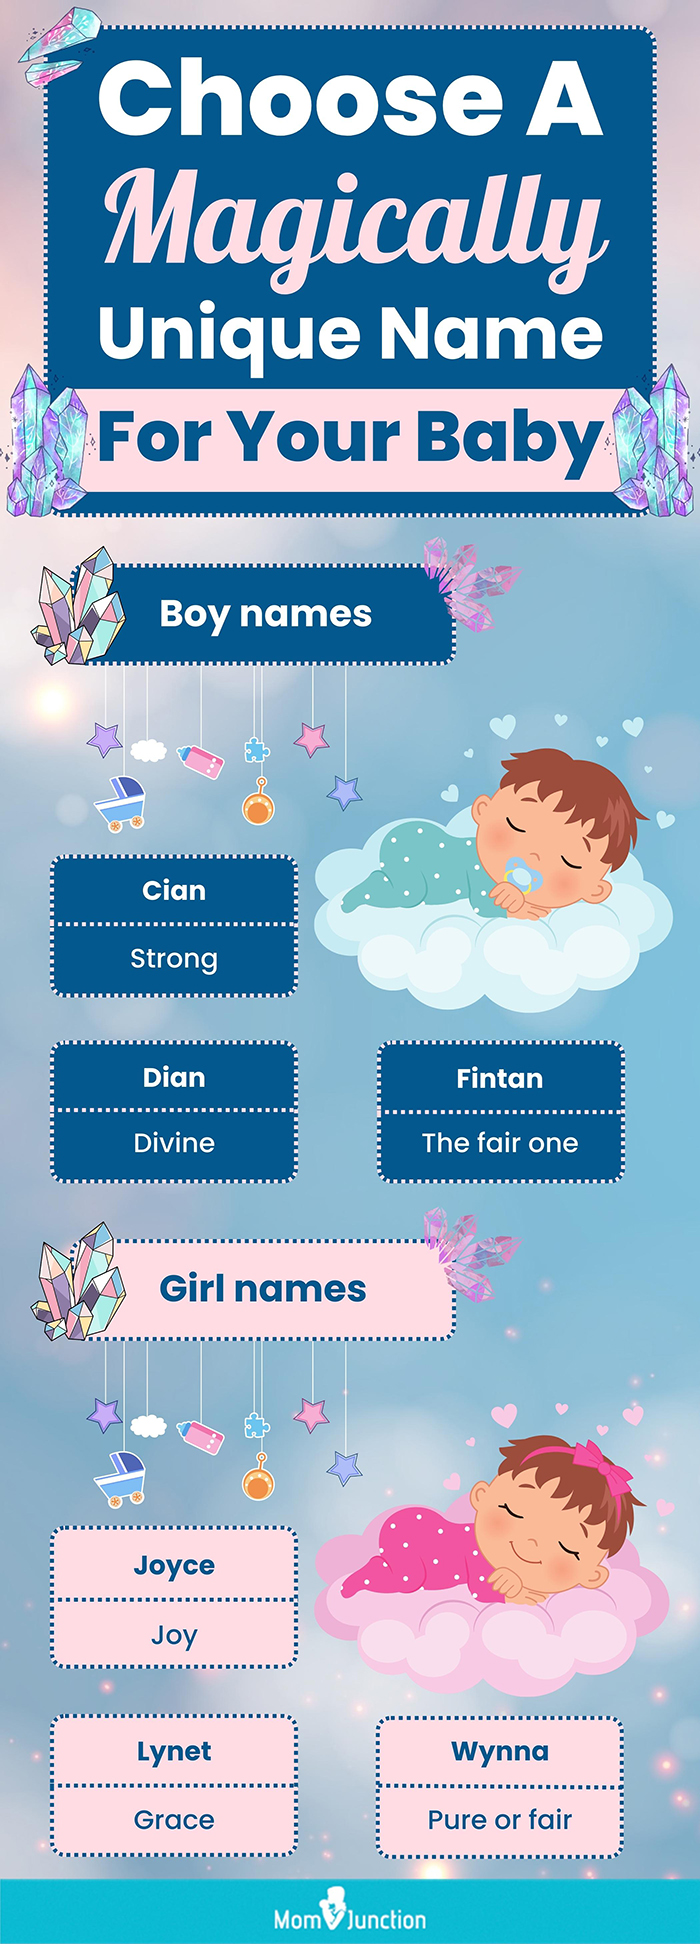 choose a magically unique name for your baby (infographic)